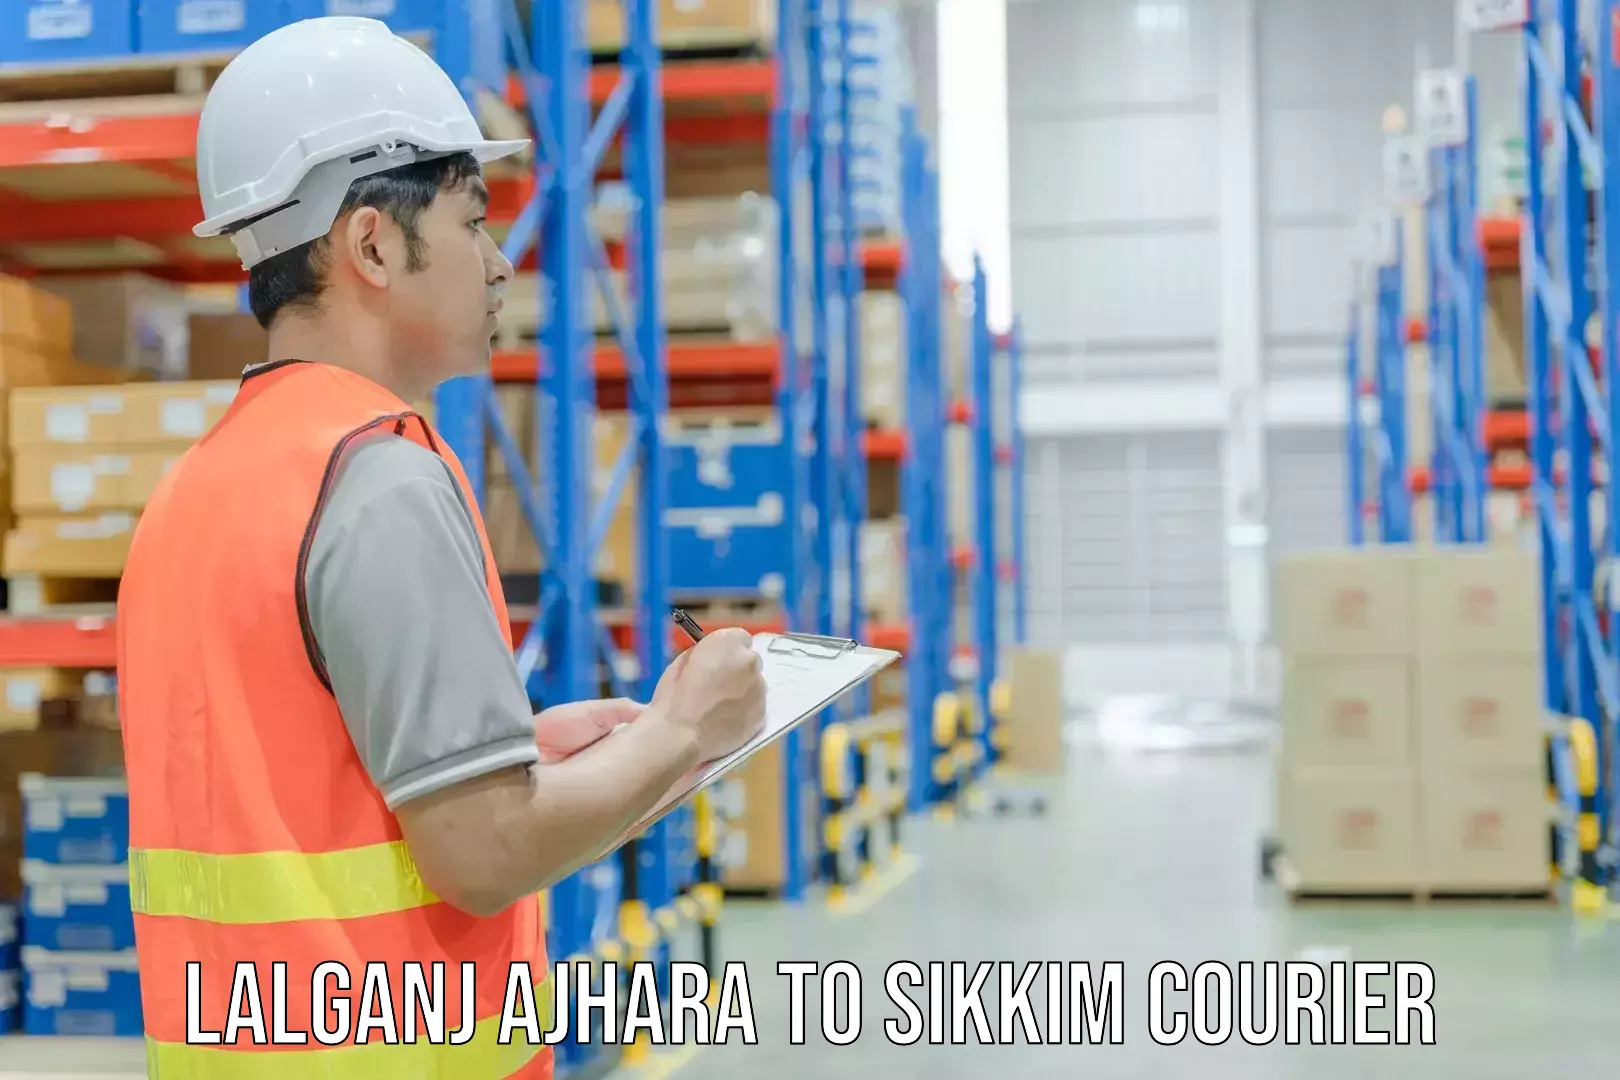 State-of-the-art courier technology Lalganj Ajhara to South Sikkim